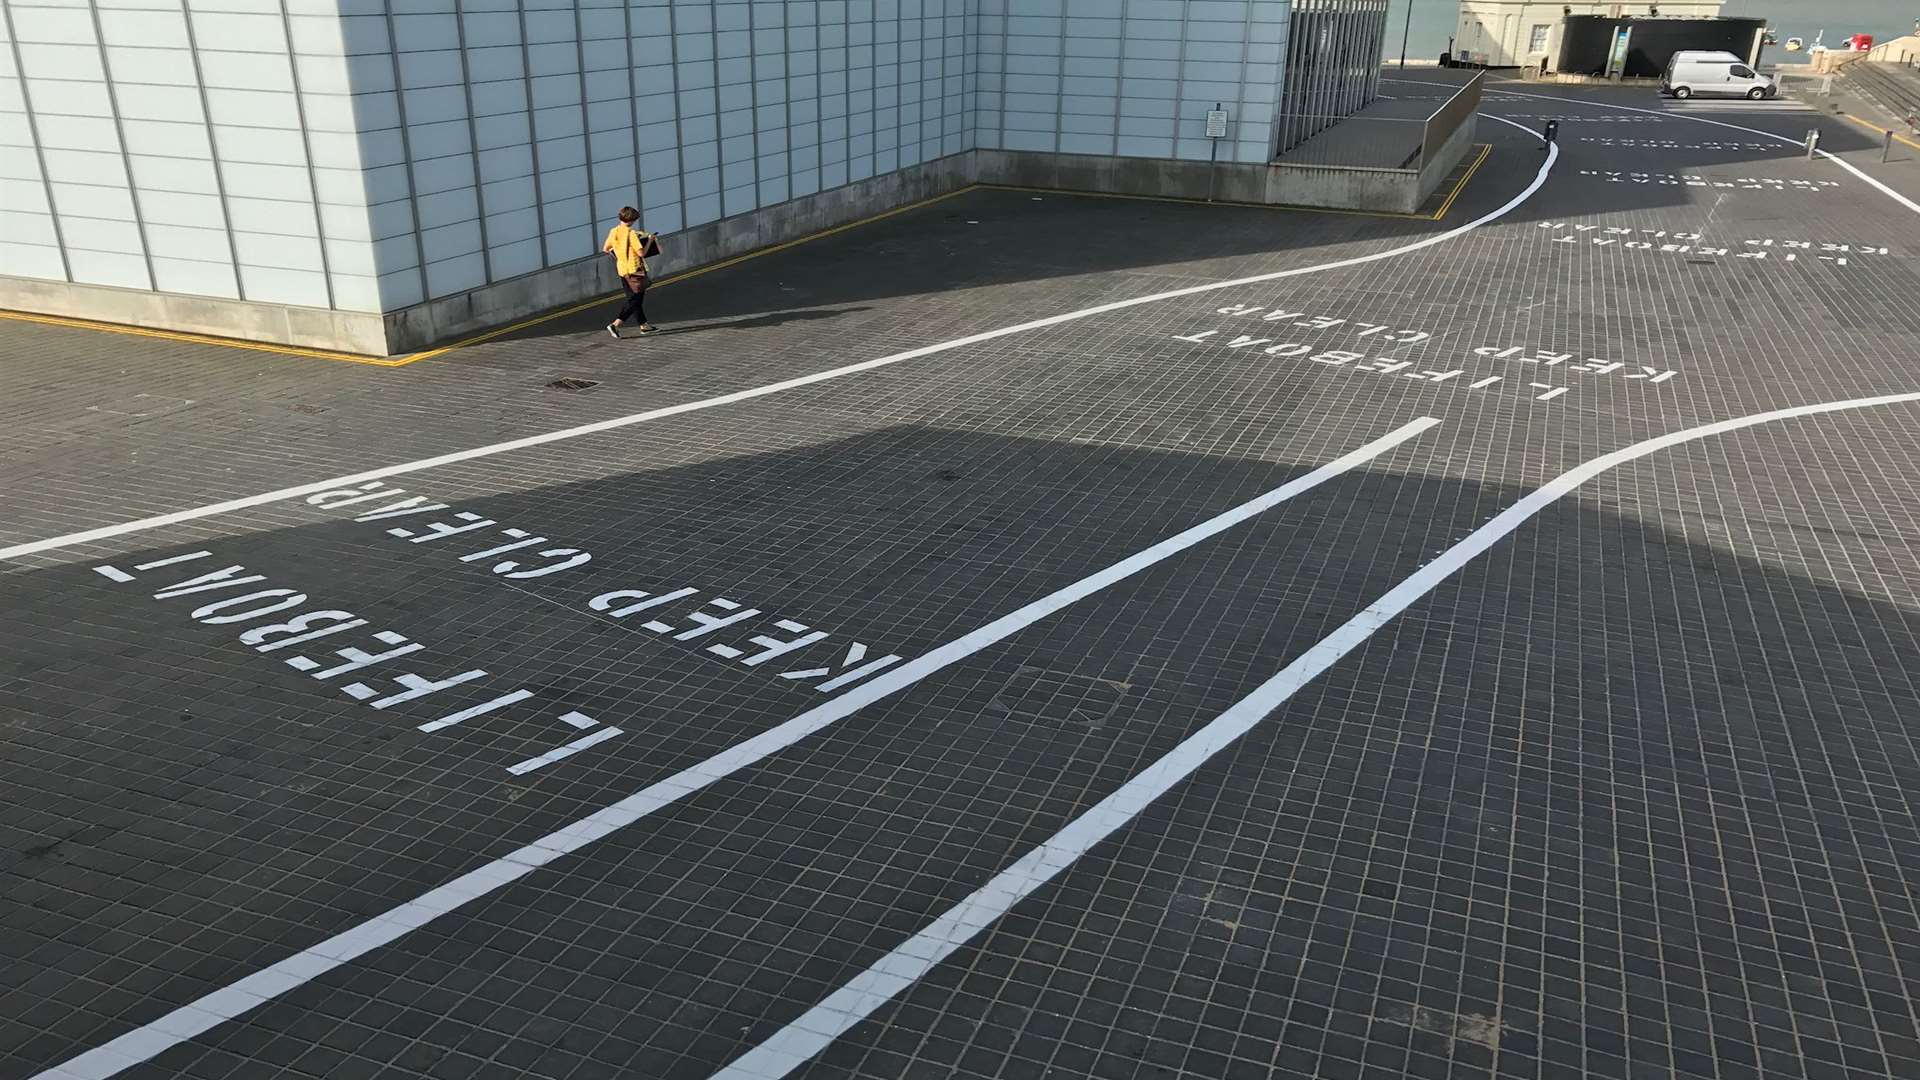 The new markings outside the Turner Contemporary